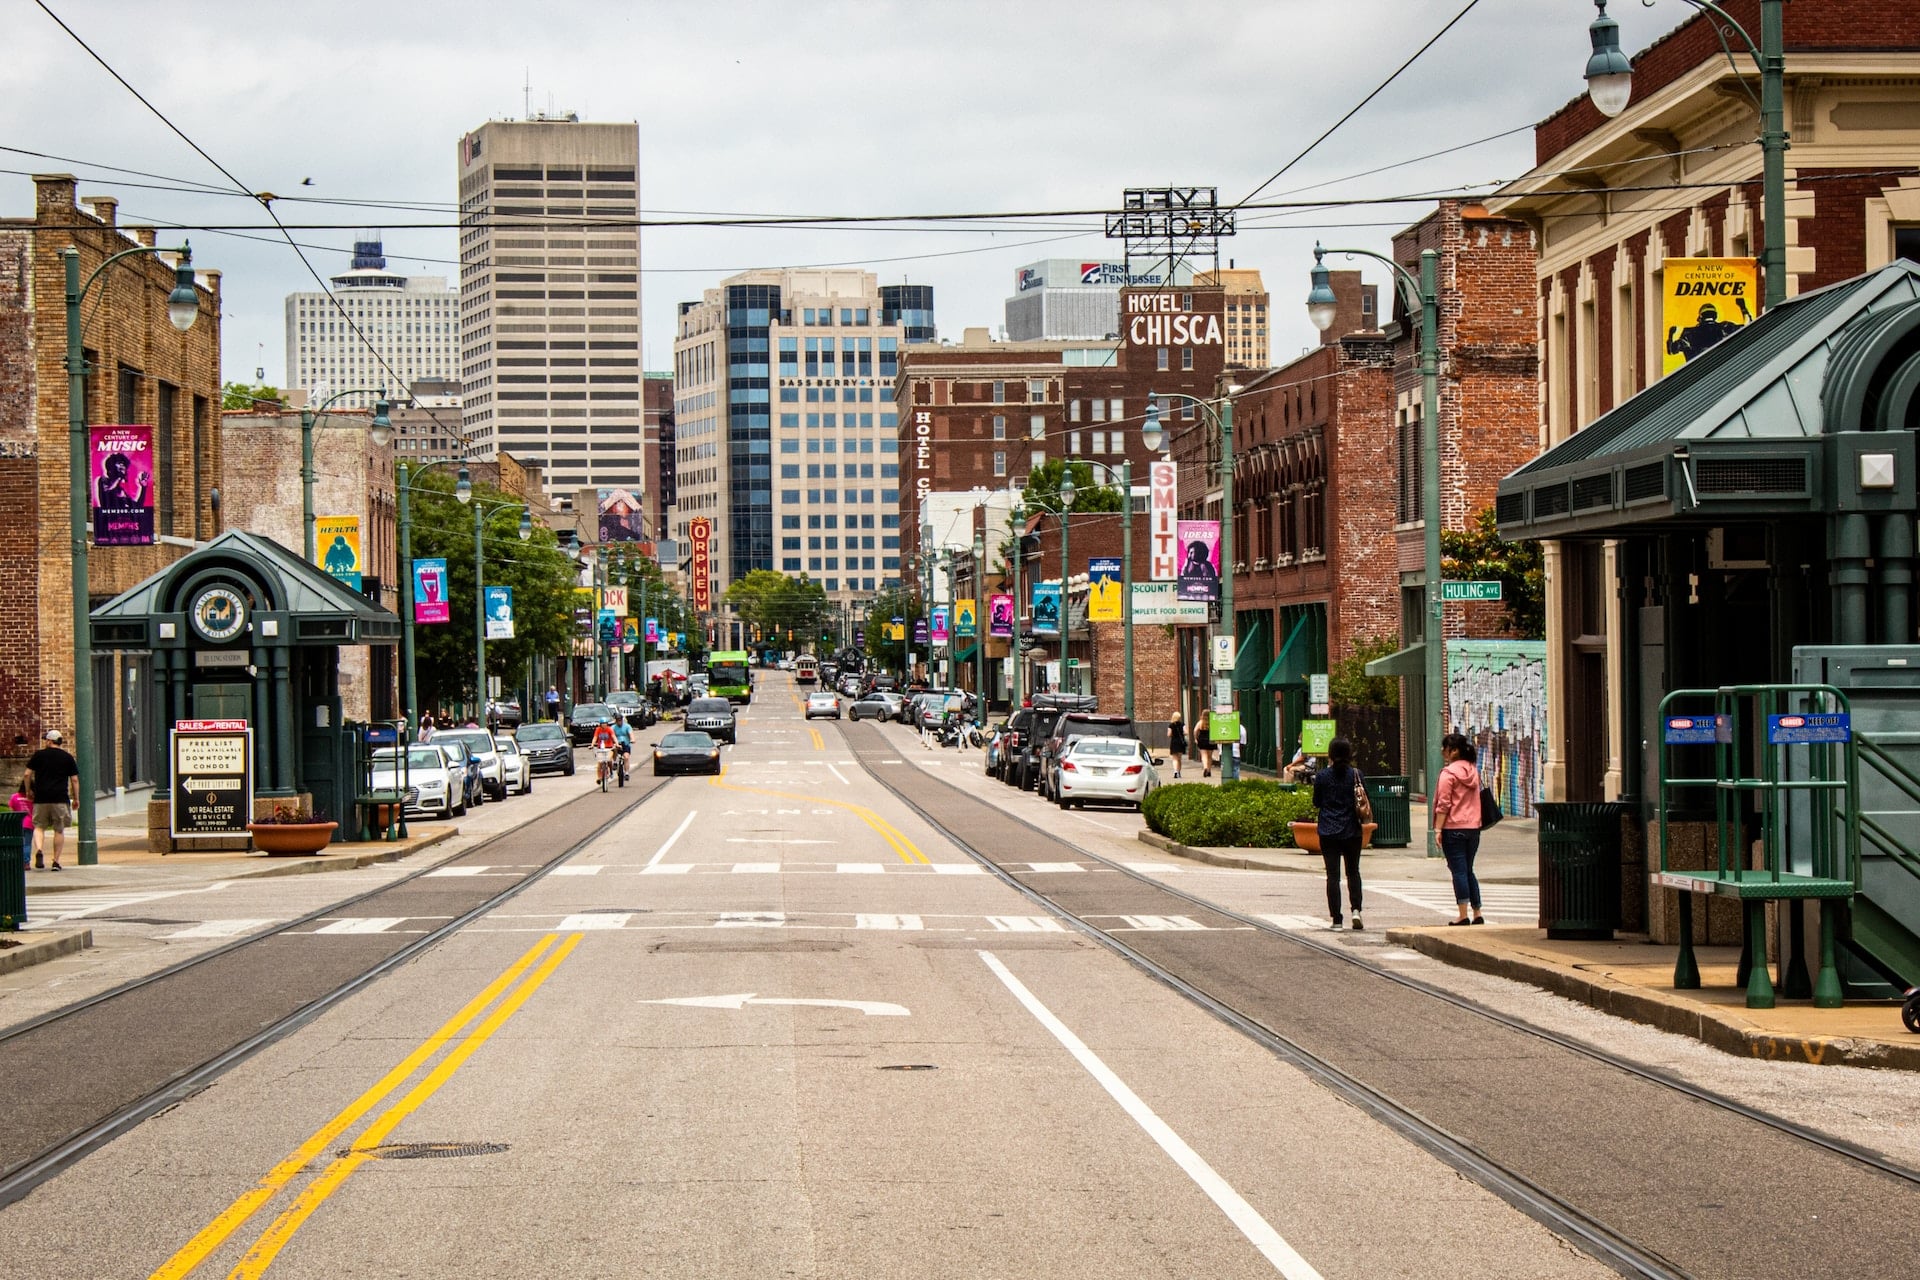 Beale Street is an excellent area to stay for those interested in experiencing Memphis' rich musical history